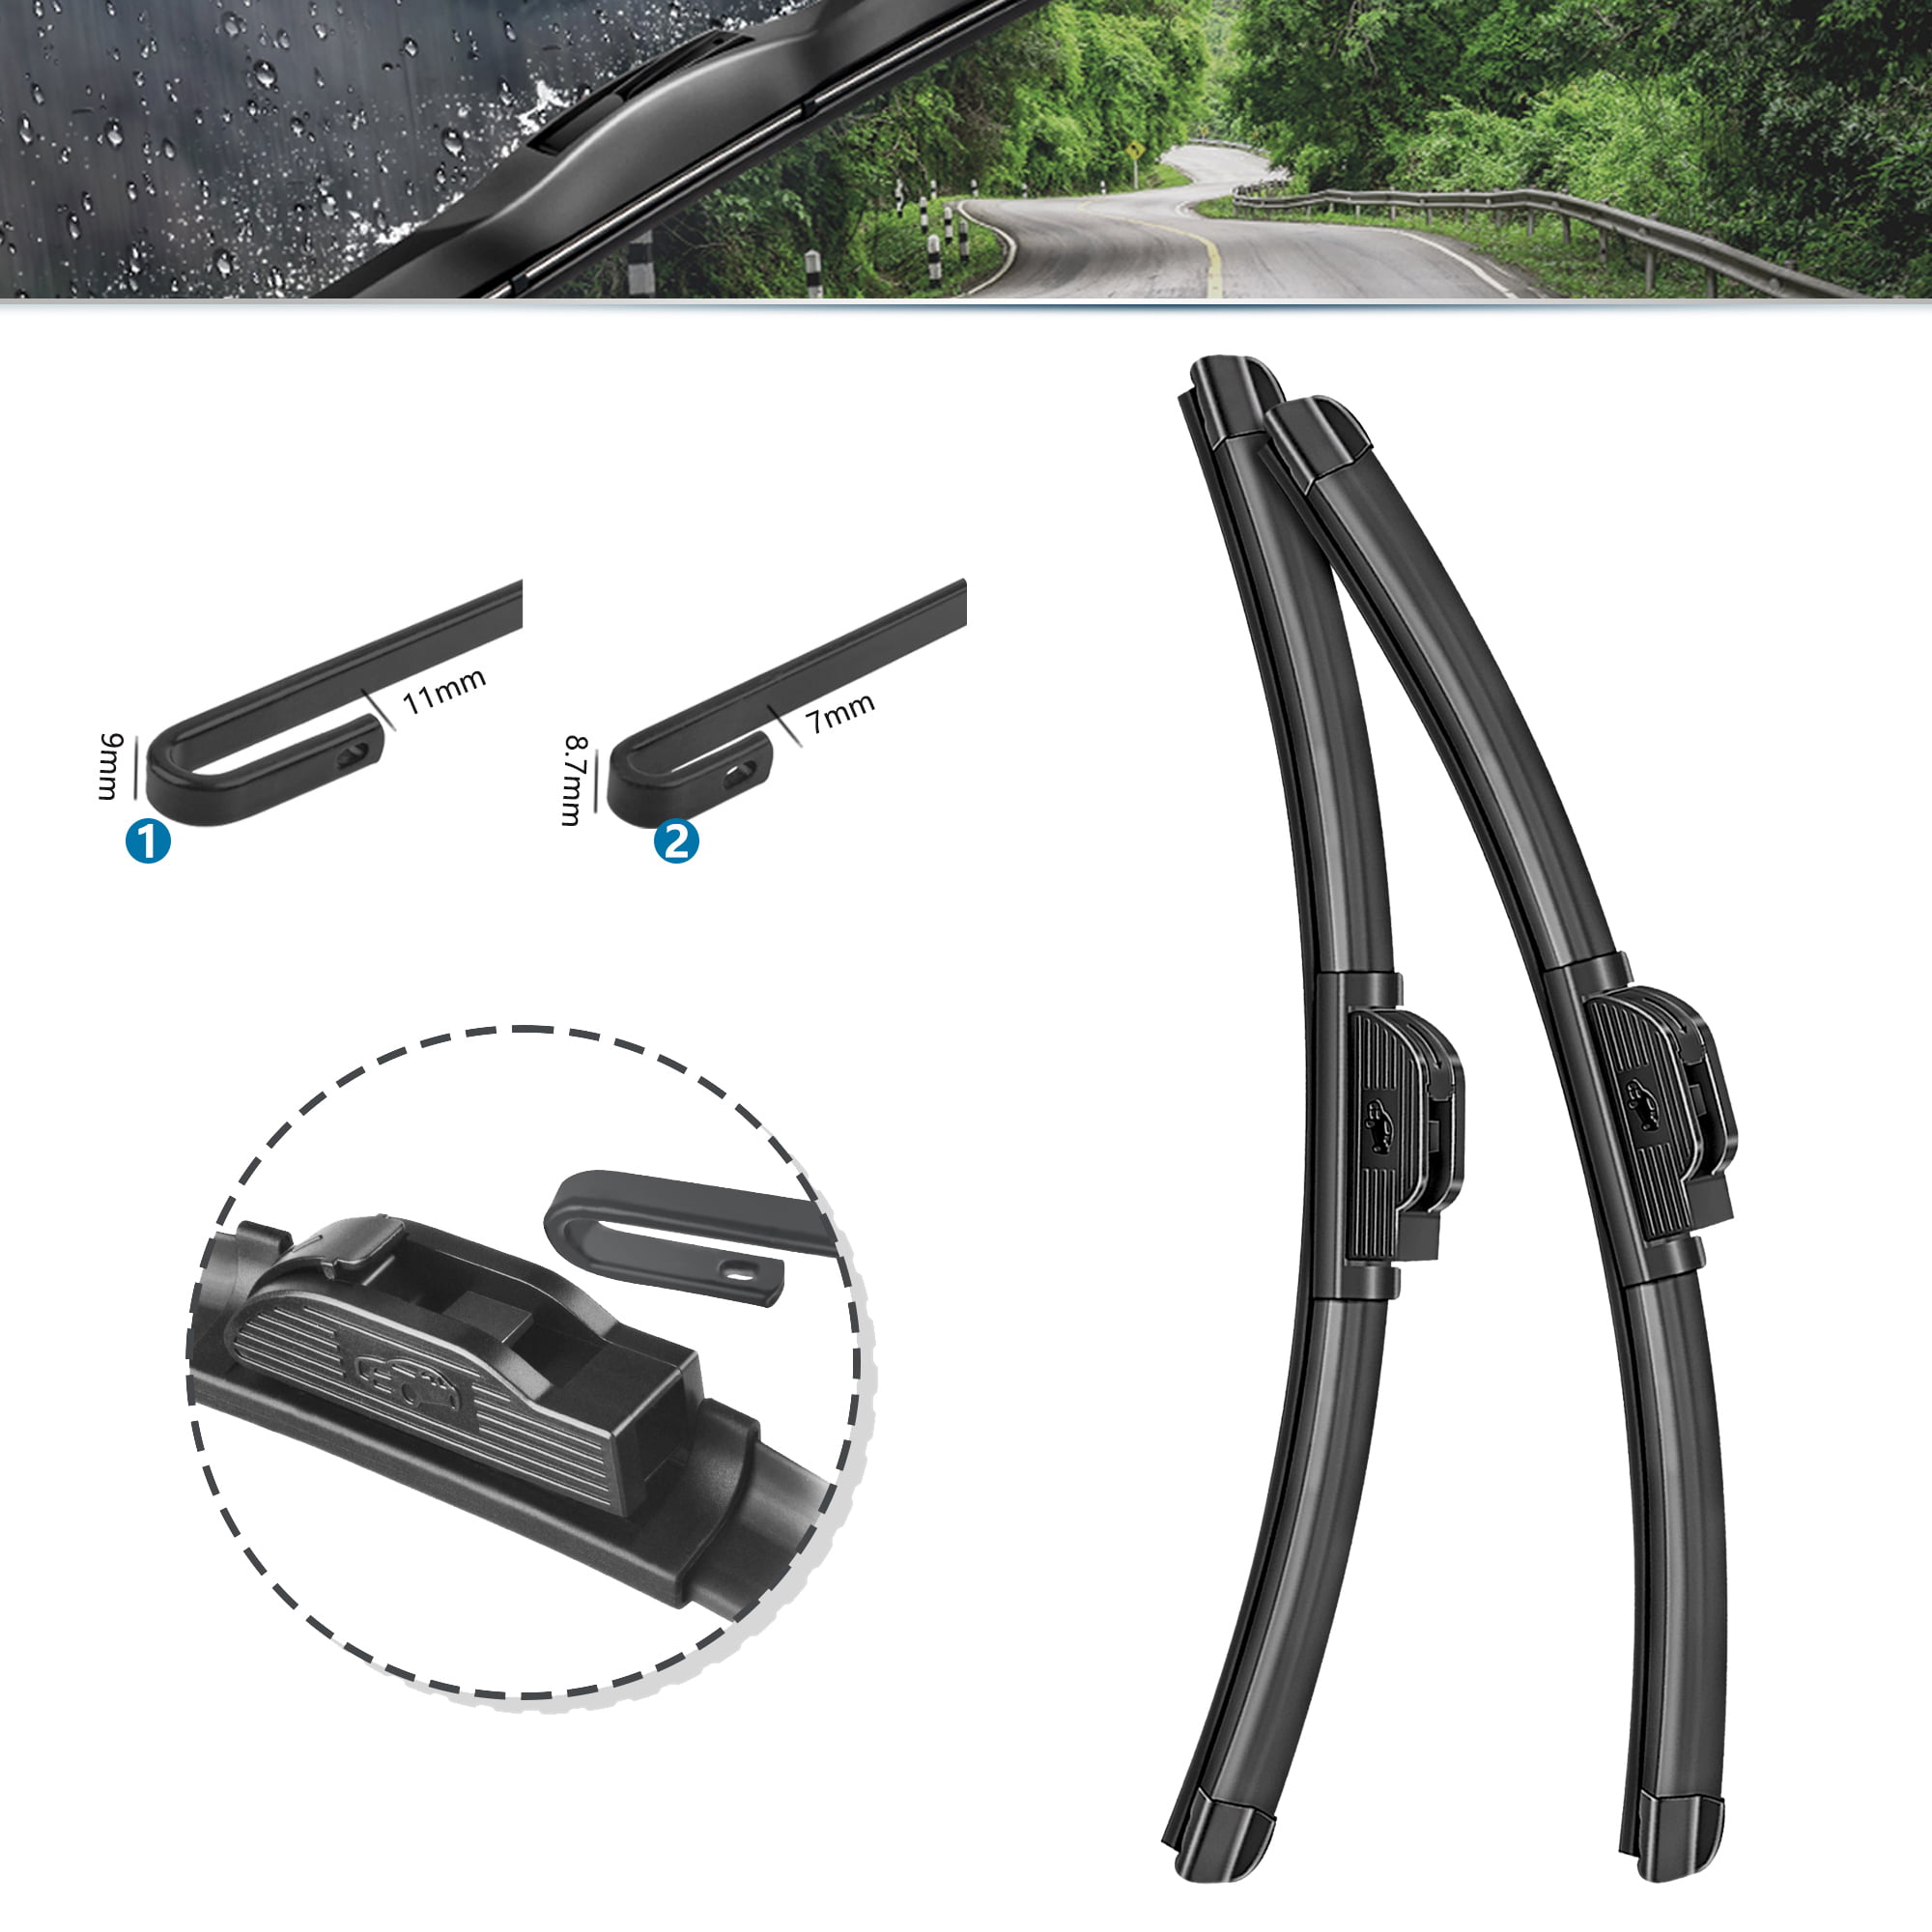 Revitalizing Your Dodge Intrepid: Windshield Wiper Arm Replacement